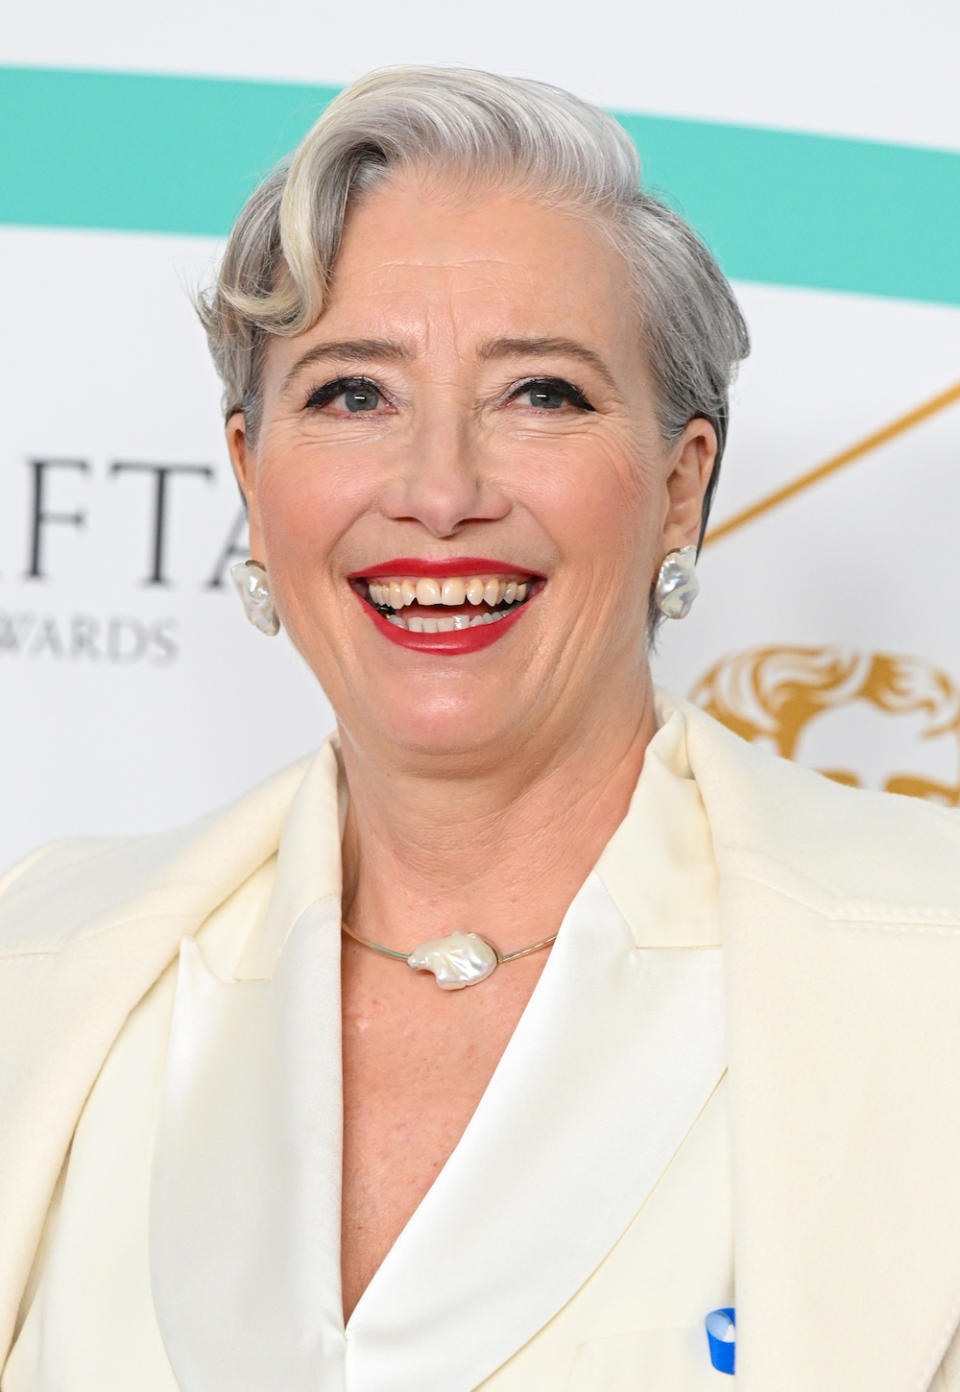 <p> The quiff was a super popular hairstyle for men in the 1950s, but it also became a feature of both long and short hairstyles for women. It looks great on hair of any length, as actress Emma Thompson proves with this curled quiff on her cropped style. </p>